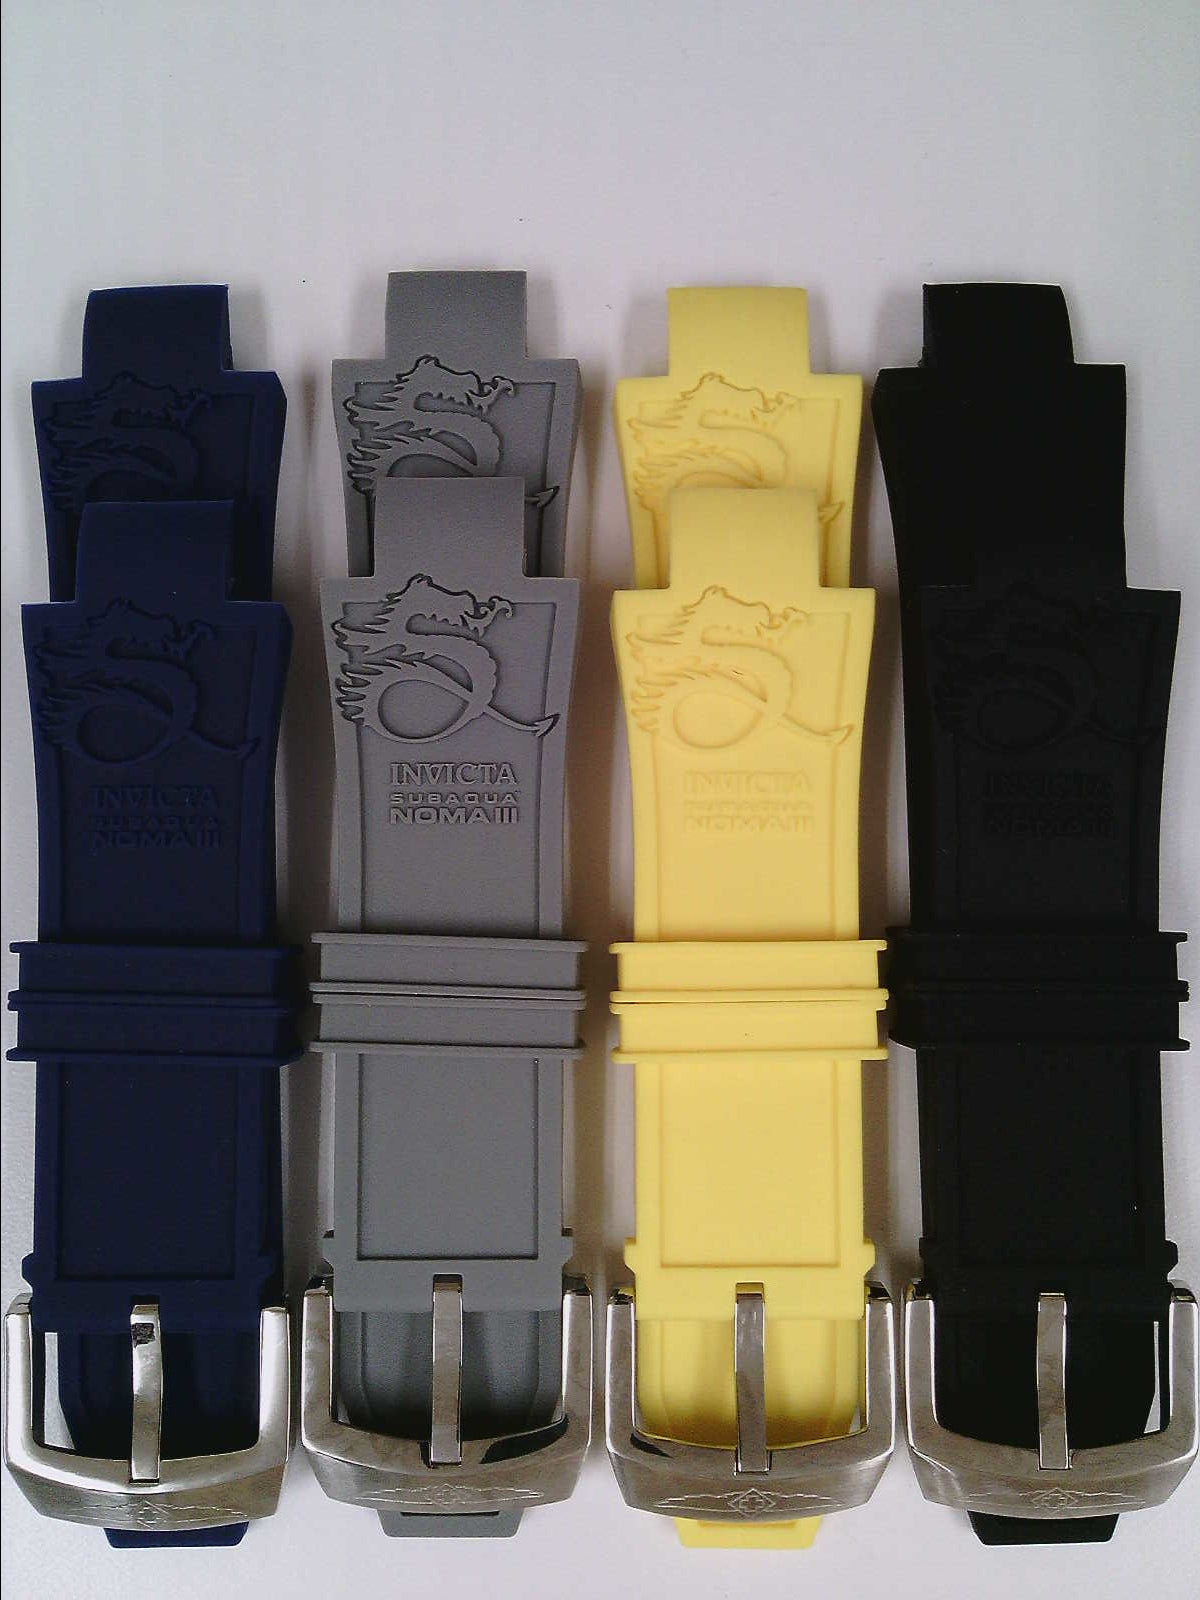 Band Combo for 50 MM Subaqua Noma III- Black,Blue, Grey, and Yellow